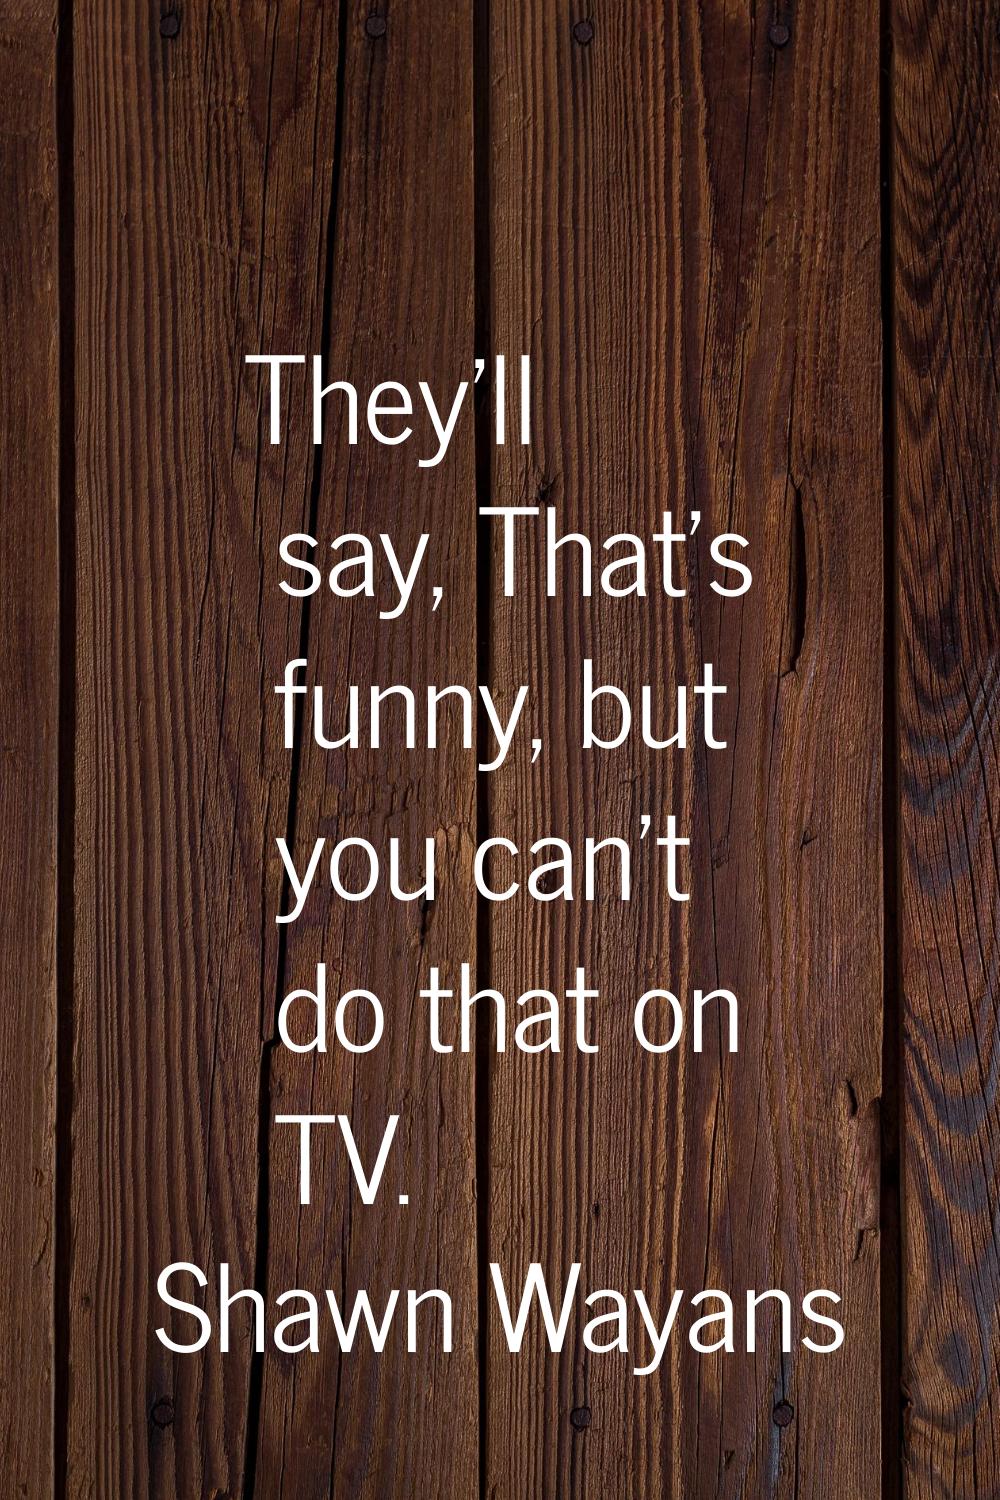 They'll say, That's funny, but you can't do that on TV.